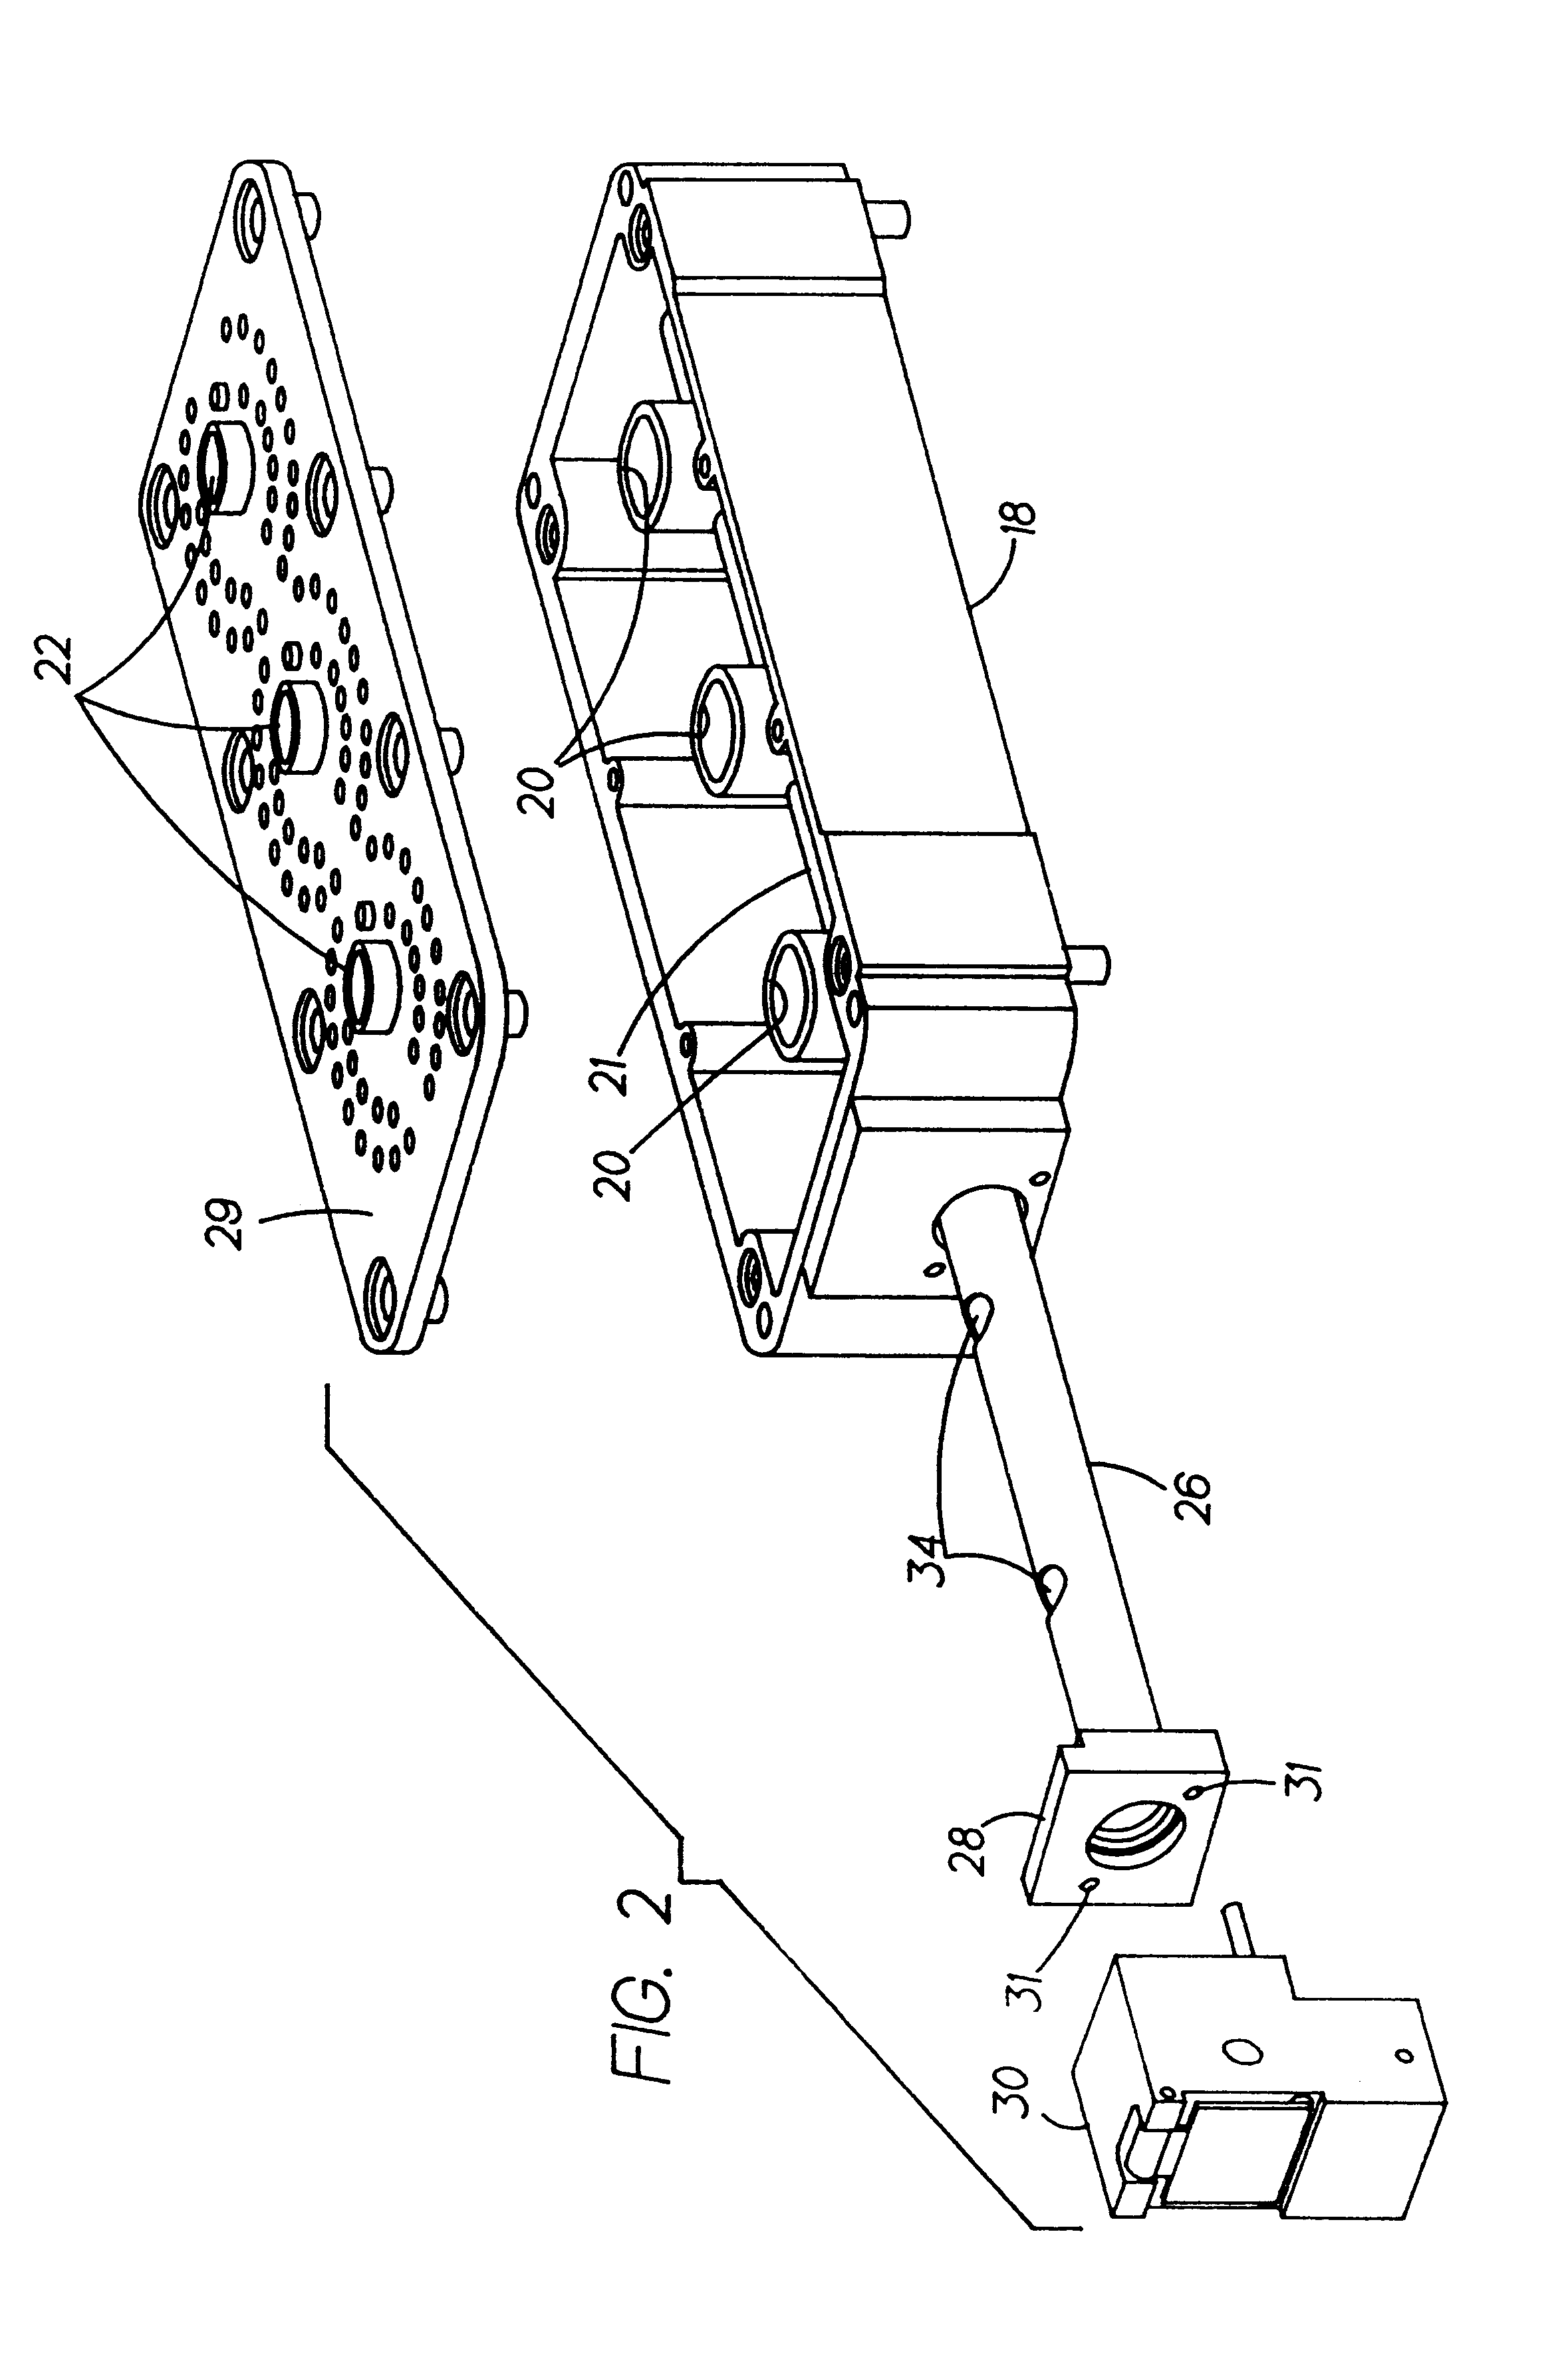 Vacuum system for an I.S. machine